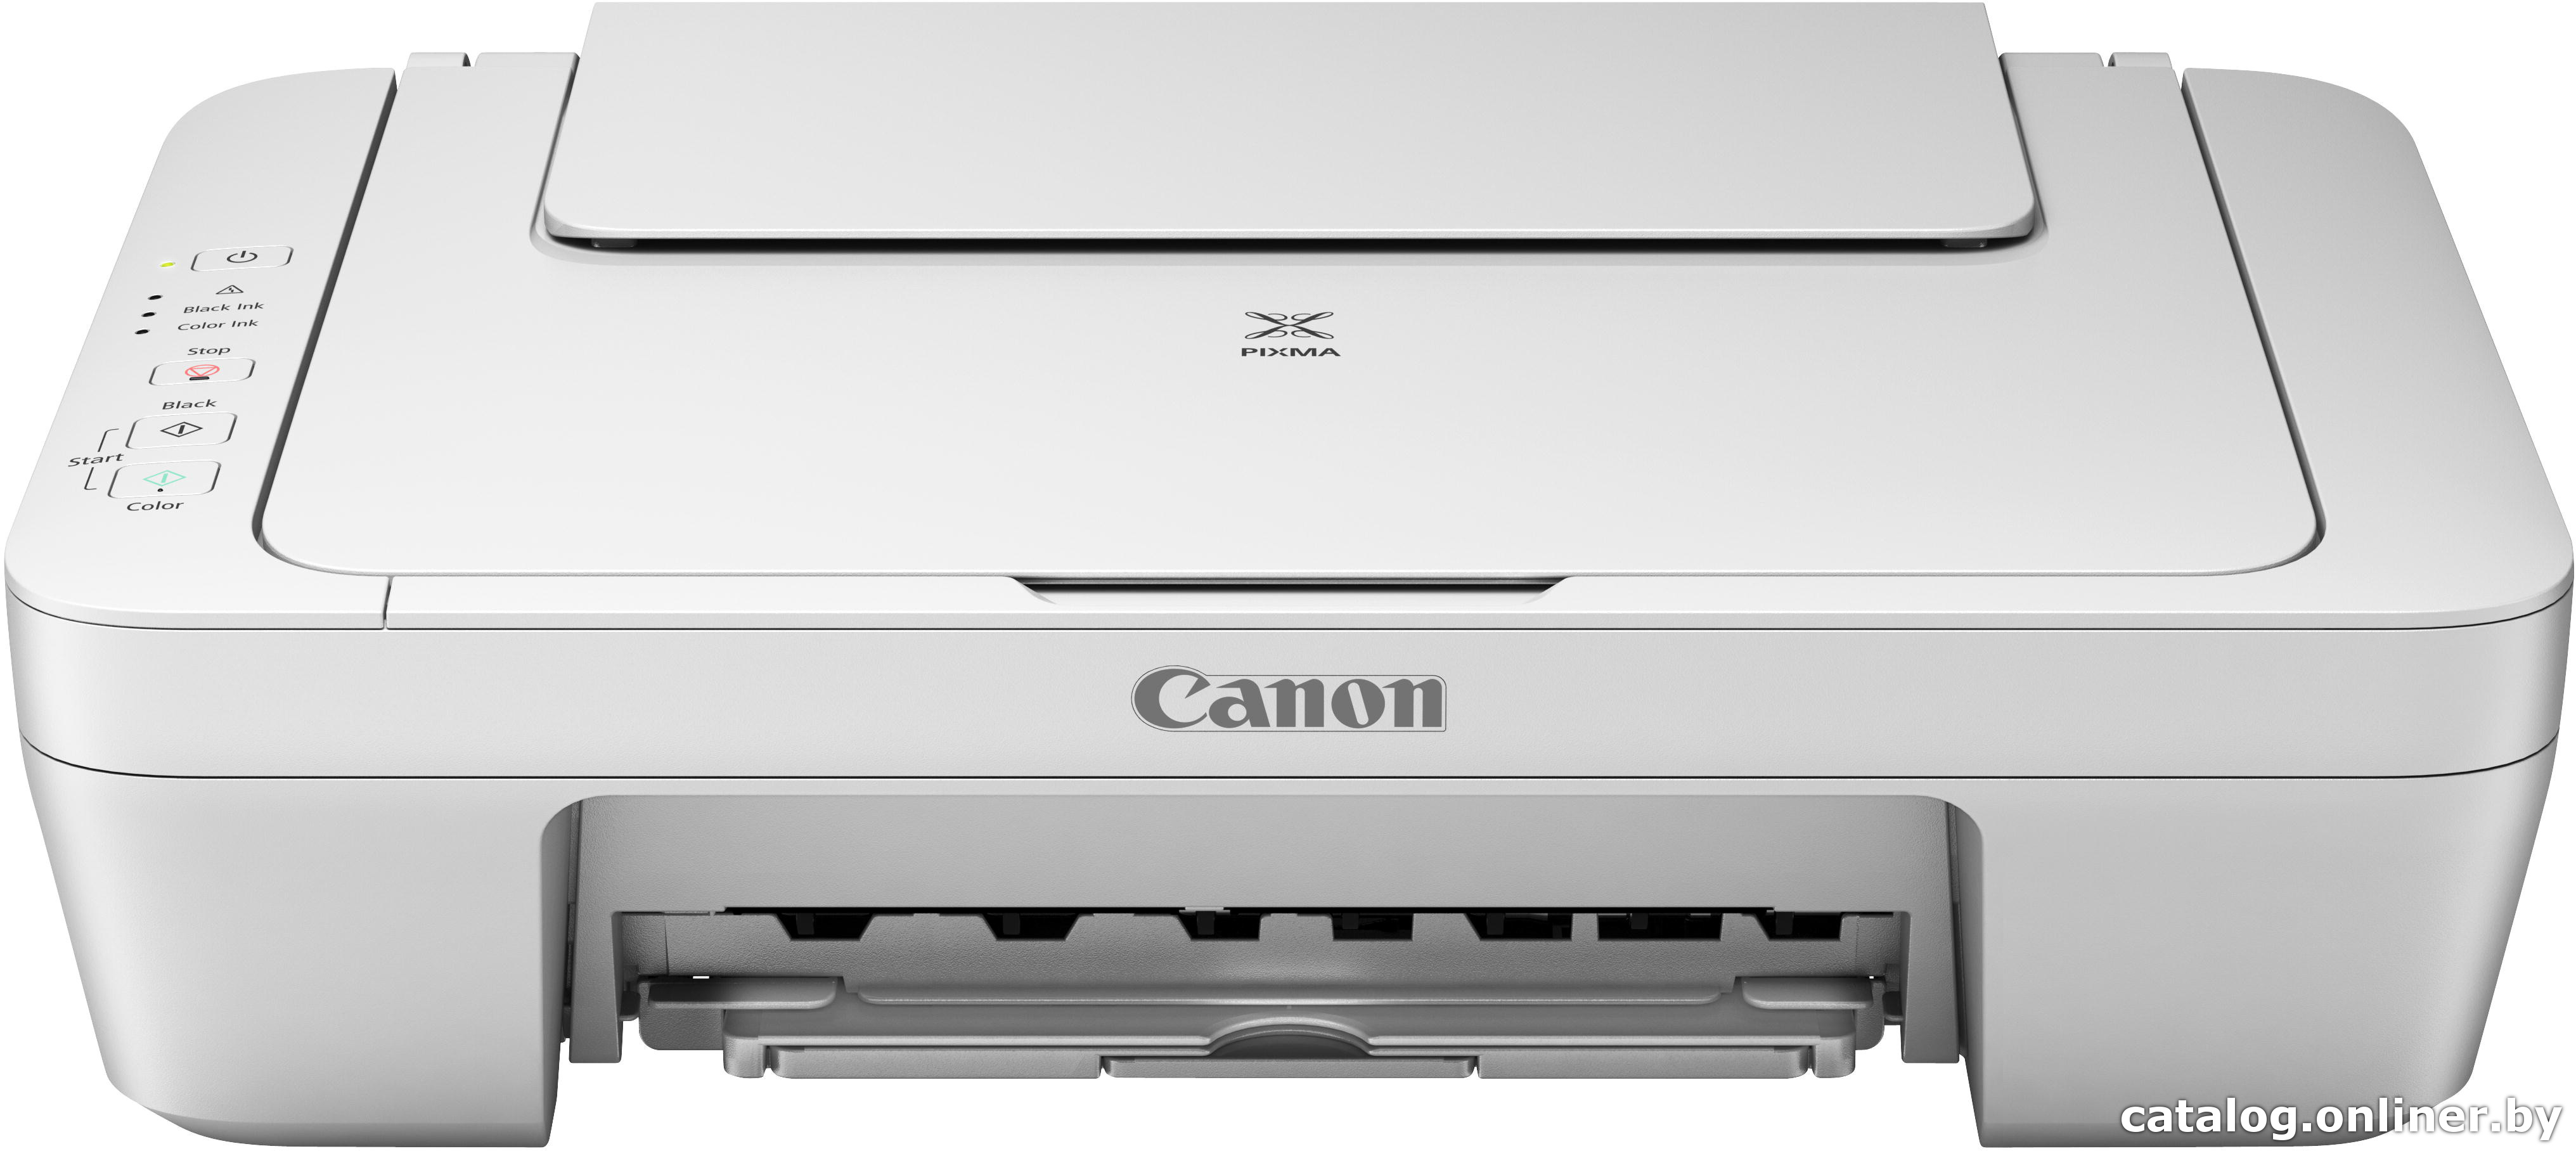 Canon MG2550 Scanner Driver Mac High Sierra 10.13 How to Download and Install - Featured